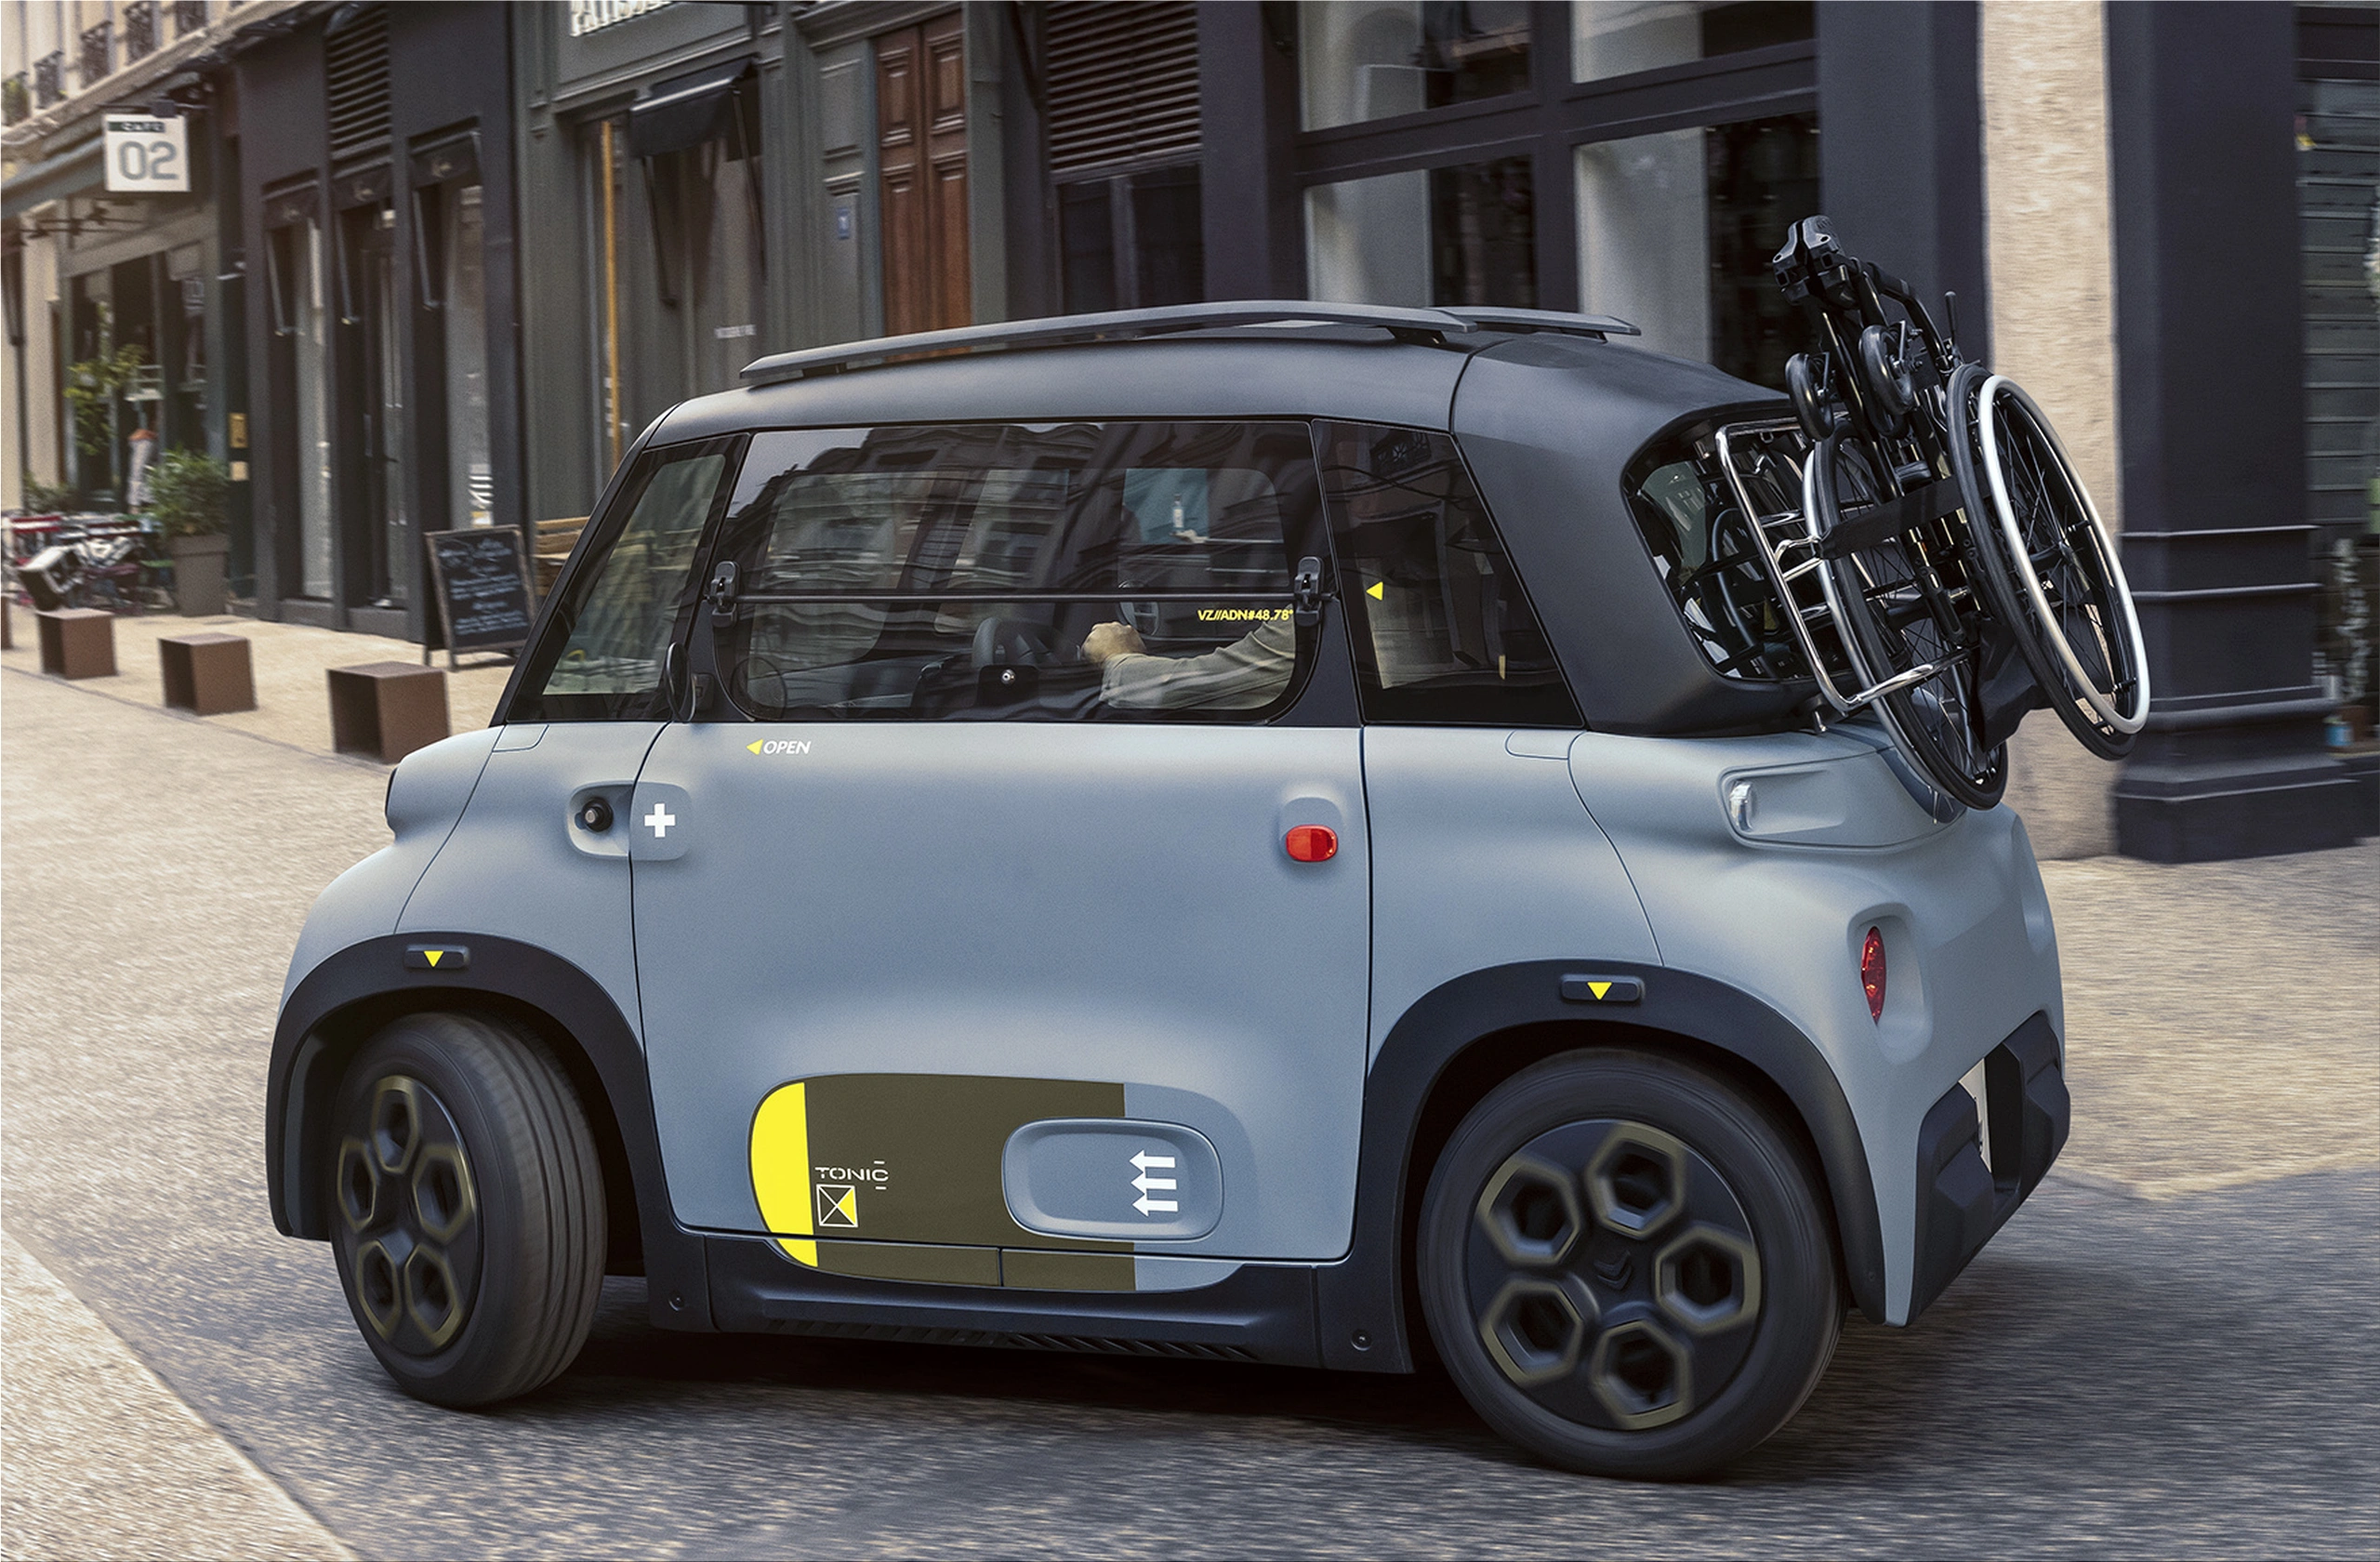 Citroen Ami for All: A New Mobility Solution for People With Disabilities